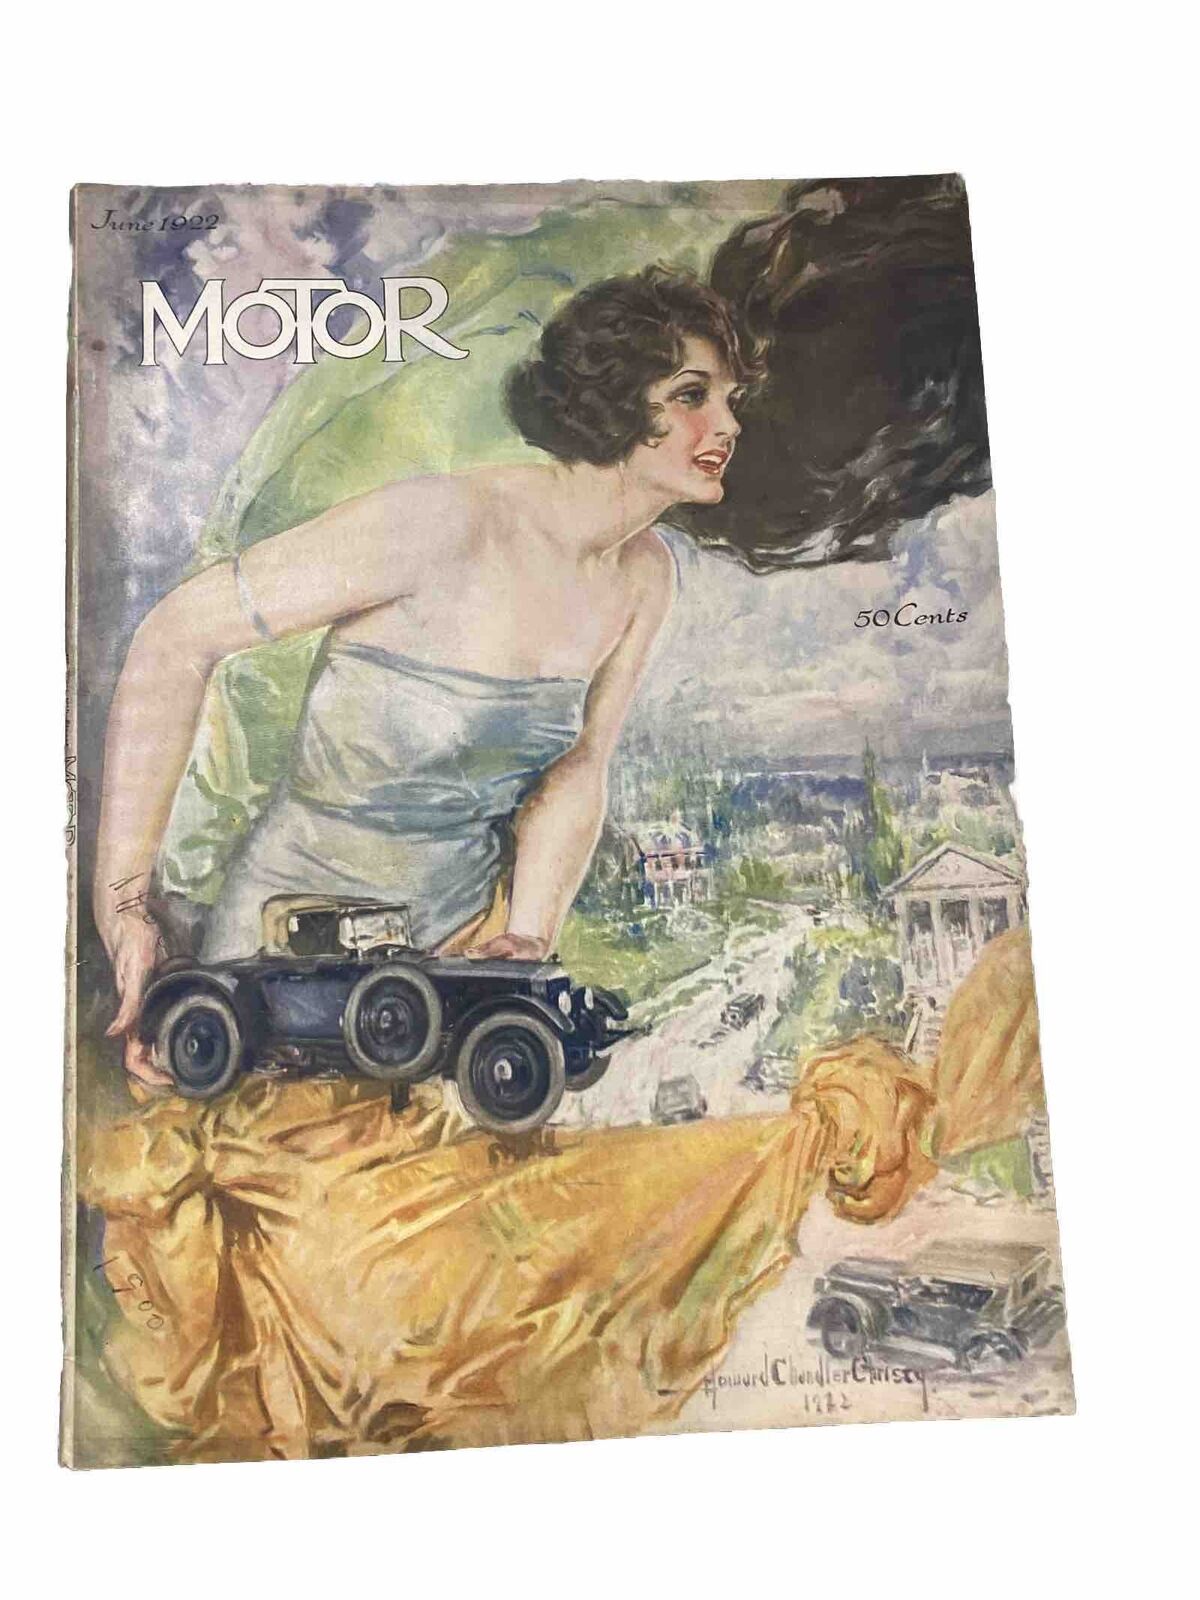 MoToR MAGAZINE JUNE 1922-RARE ANTIQUE COLLECTABLE-COVER ART BY H.C. Christy